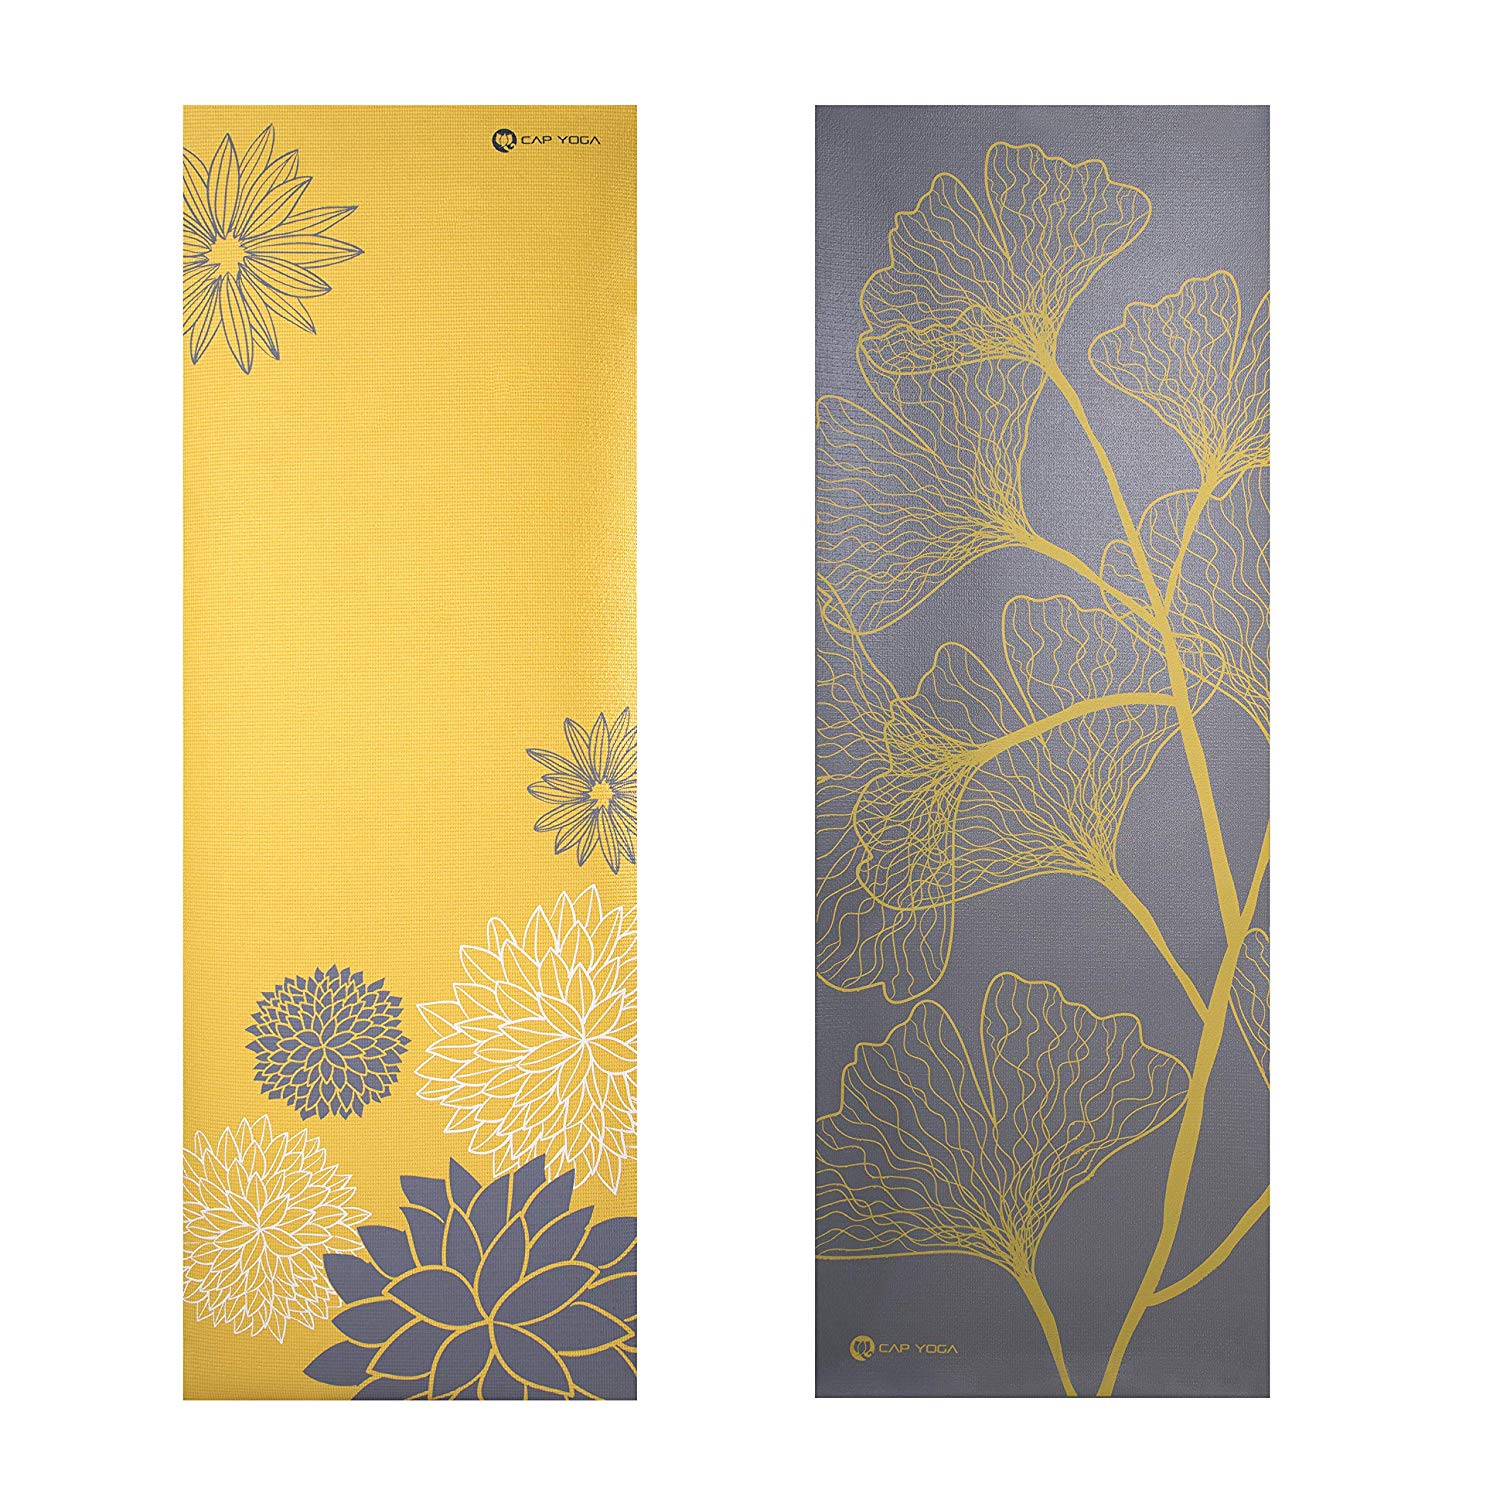 CAP Yoga Reversible Yoga Mat, 5mm with Carry Strap, Dahlia and Ginkgo - image 3 of 5